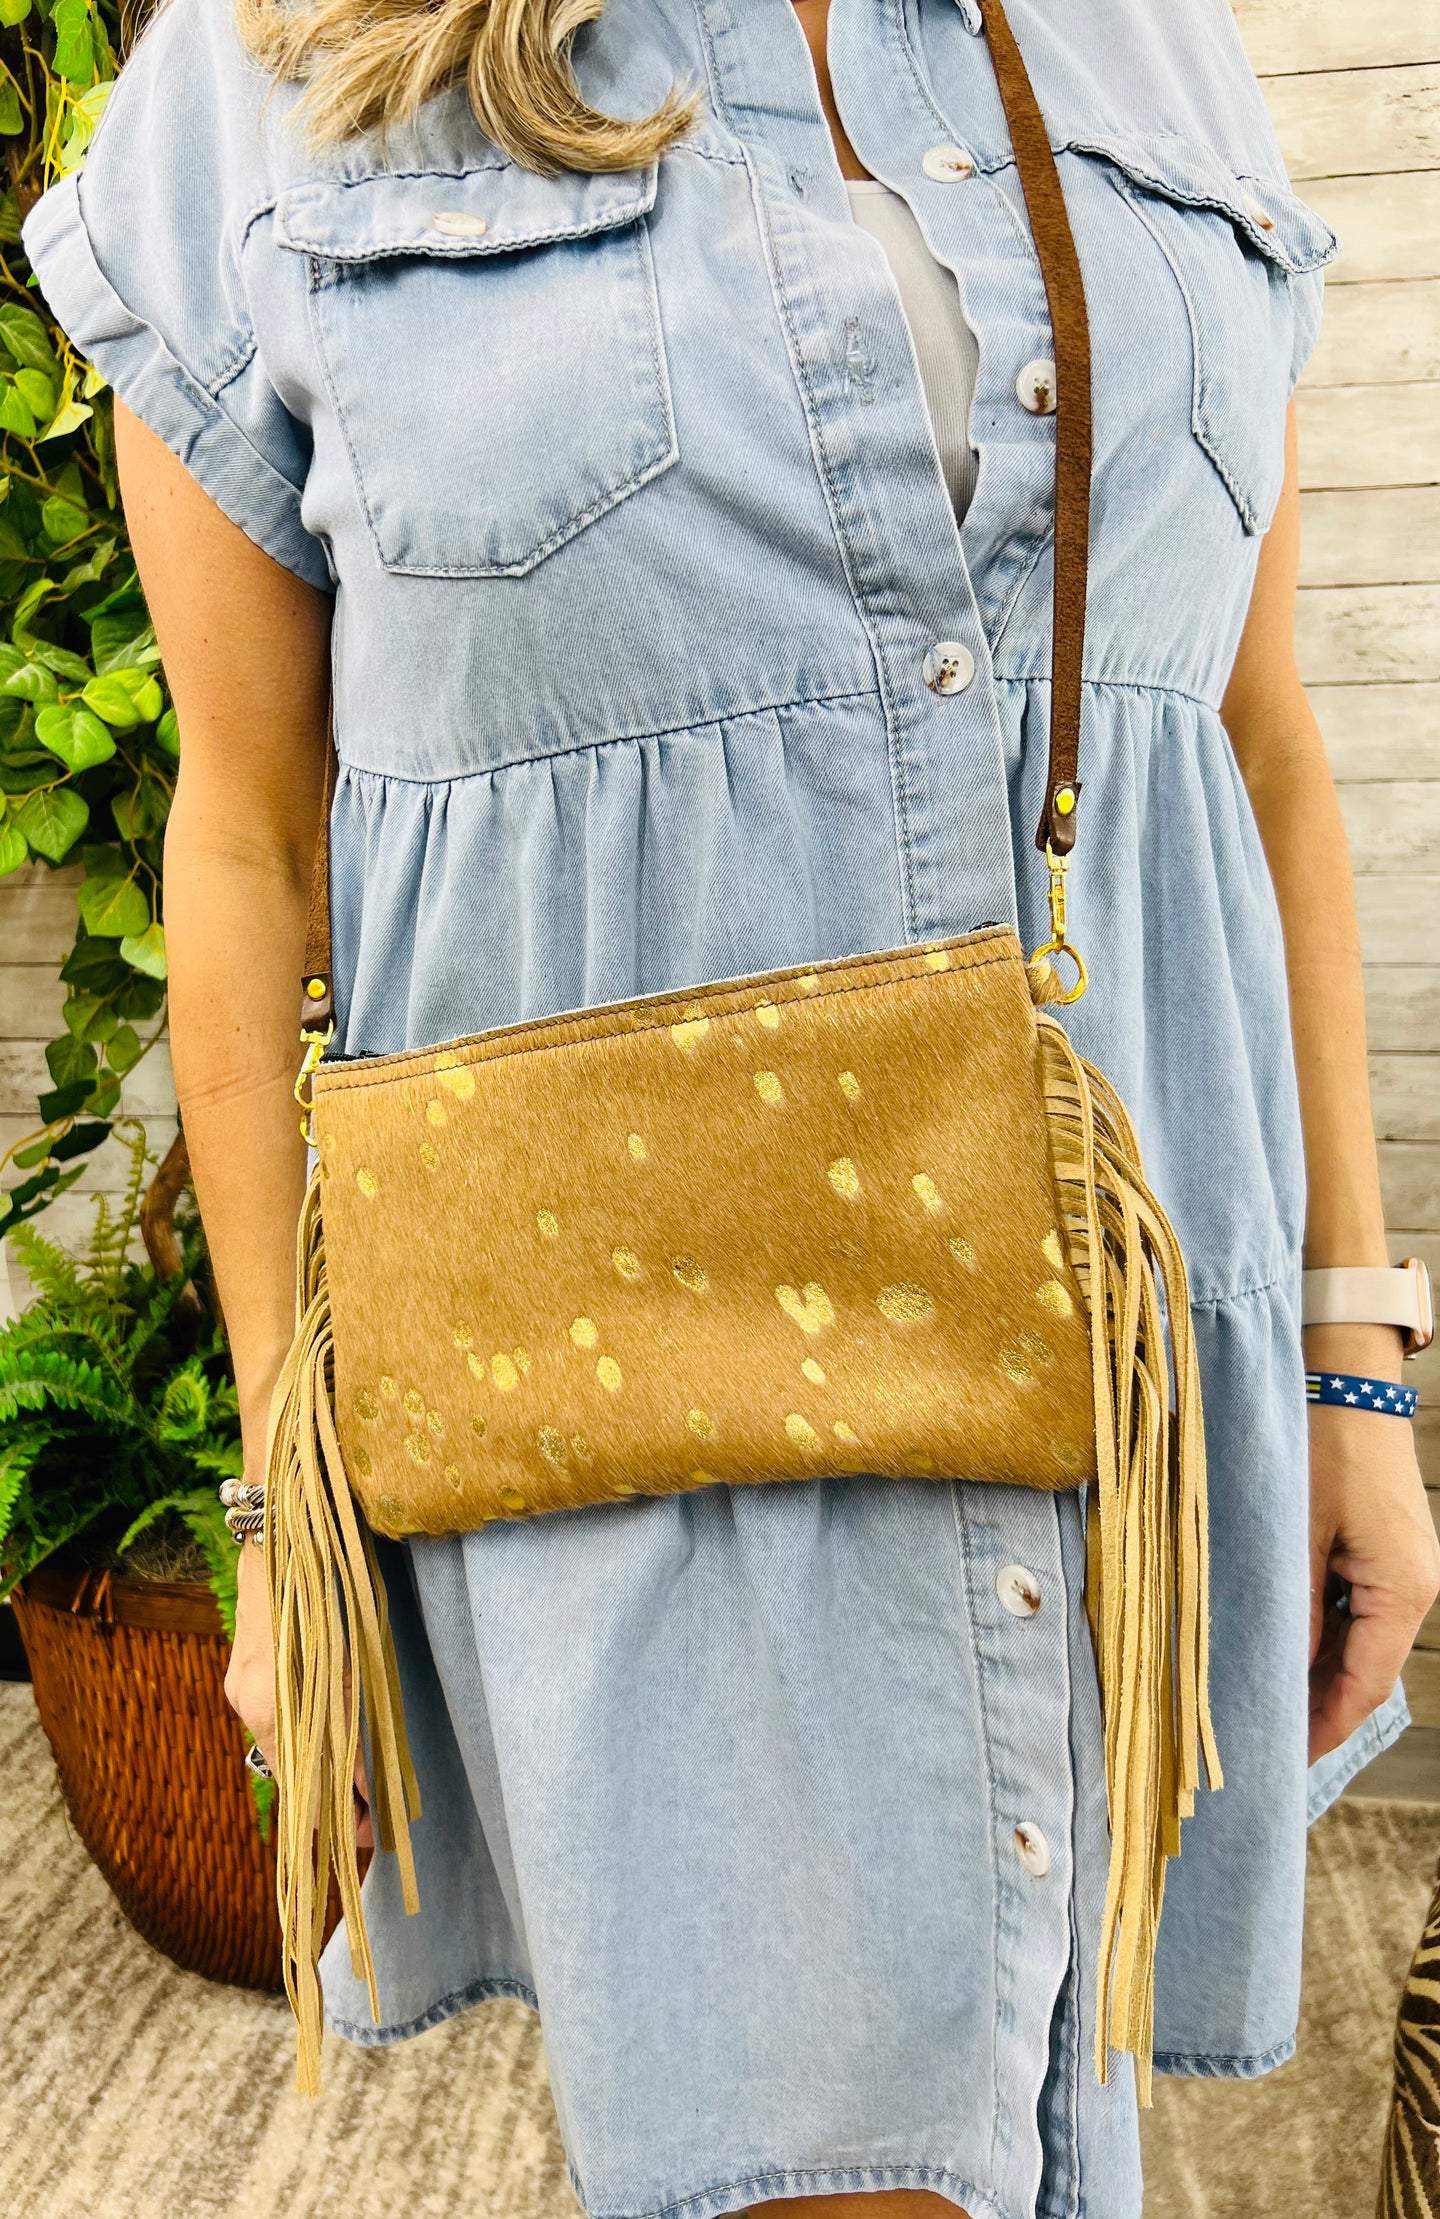 Tan and Gold Leather Crossbody